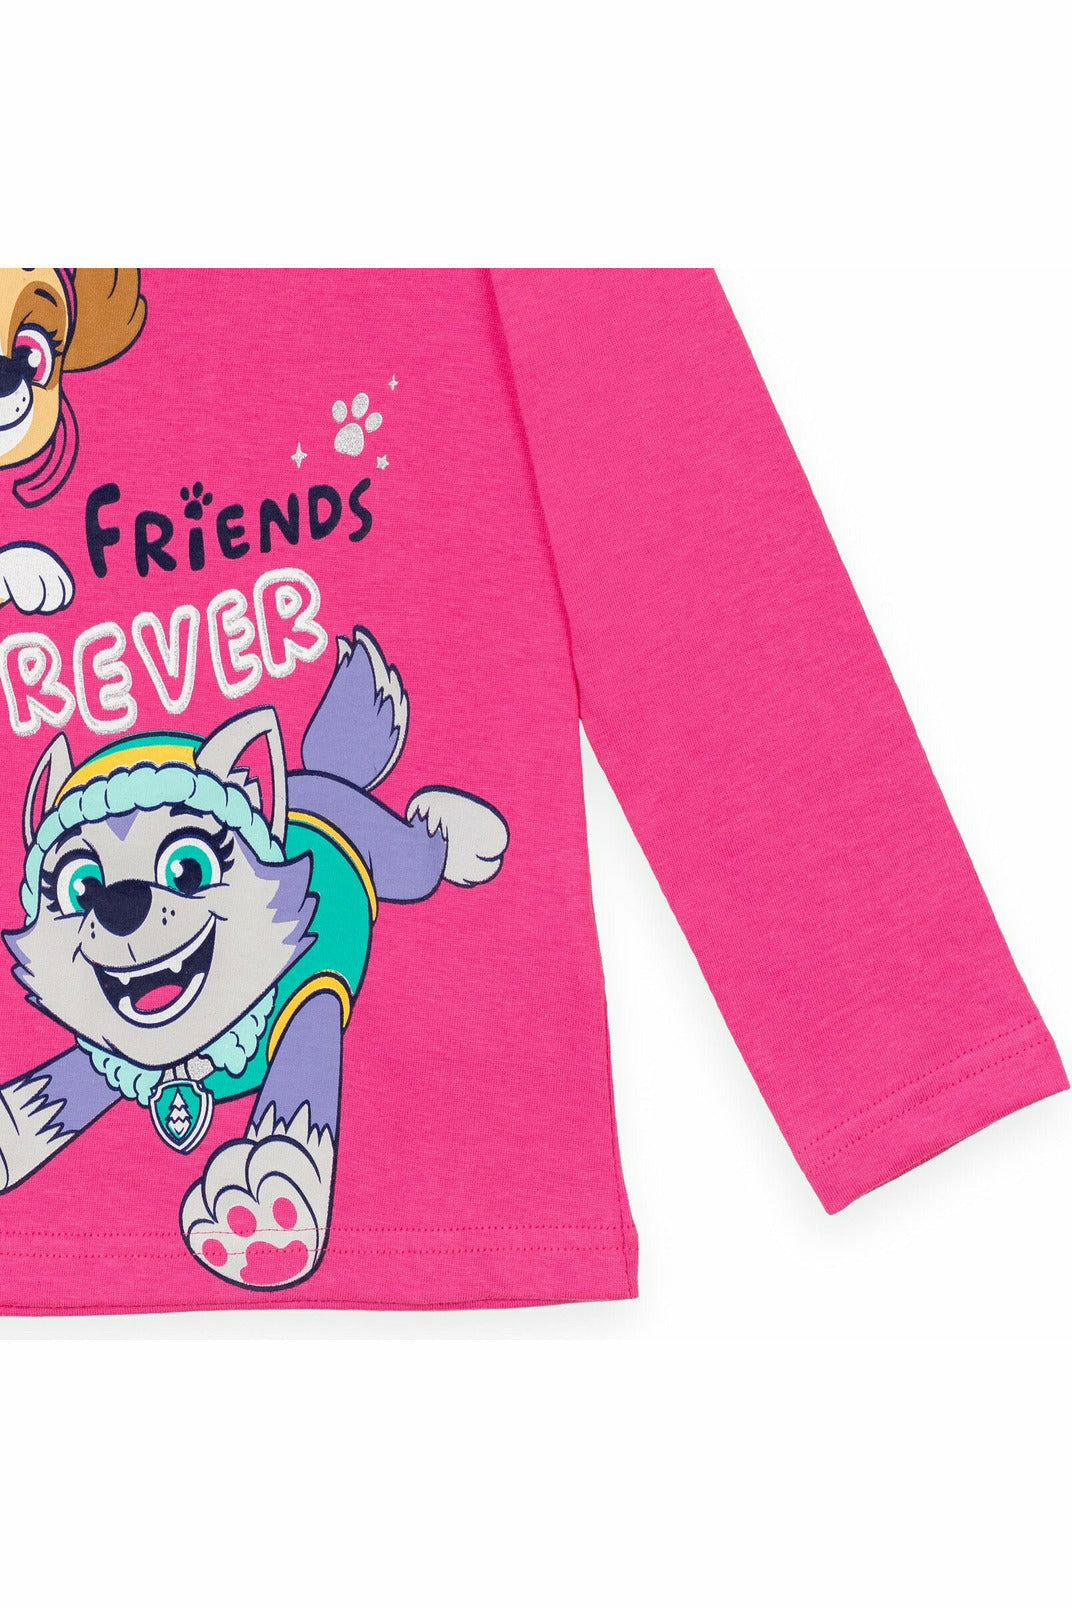 Paw Patrol 2 Pack Pullover Long Sleeve Graphic T-Shirts